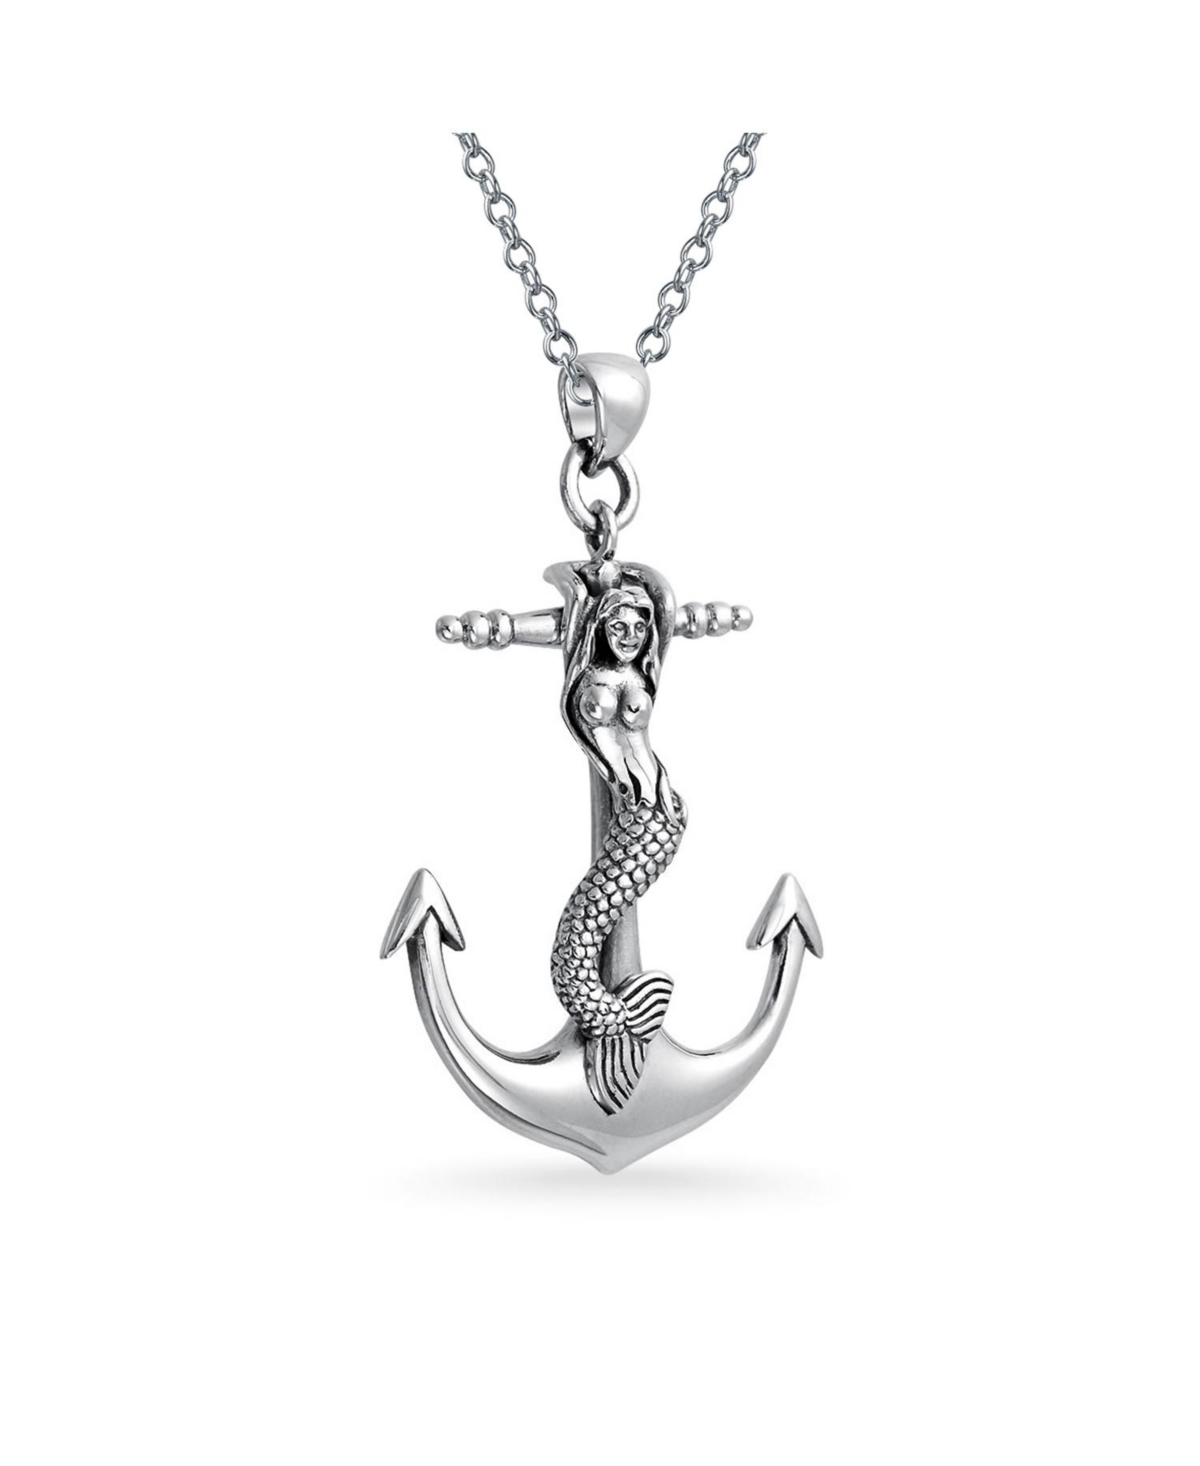 Nautical Large Anchor Dangling Sea Siren Mermaid Necklace Pendant For Women Oxidized .925 Sterling Silver - Silver